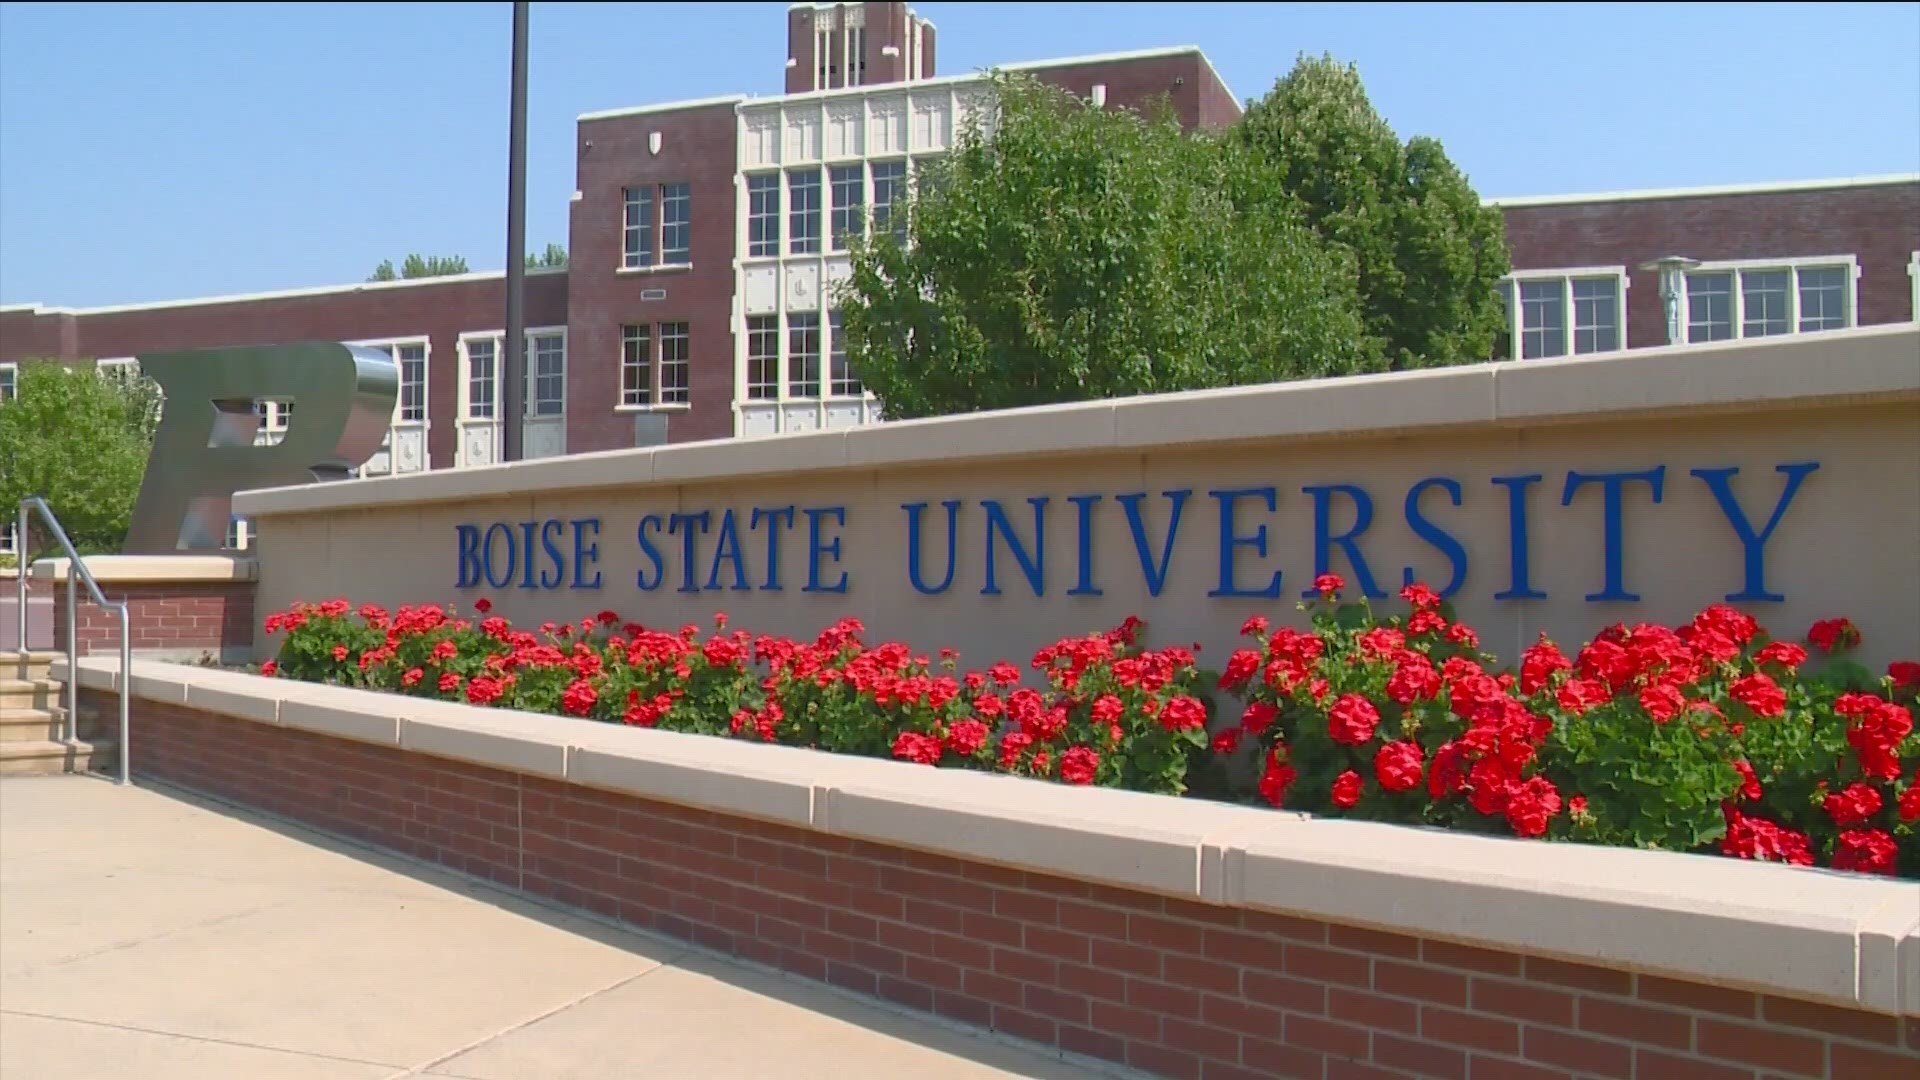 Boise State University is set to launch Idaho's first Doctor of Philosophy in Public and Population Health Leadership following State Board of Education approval.